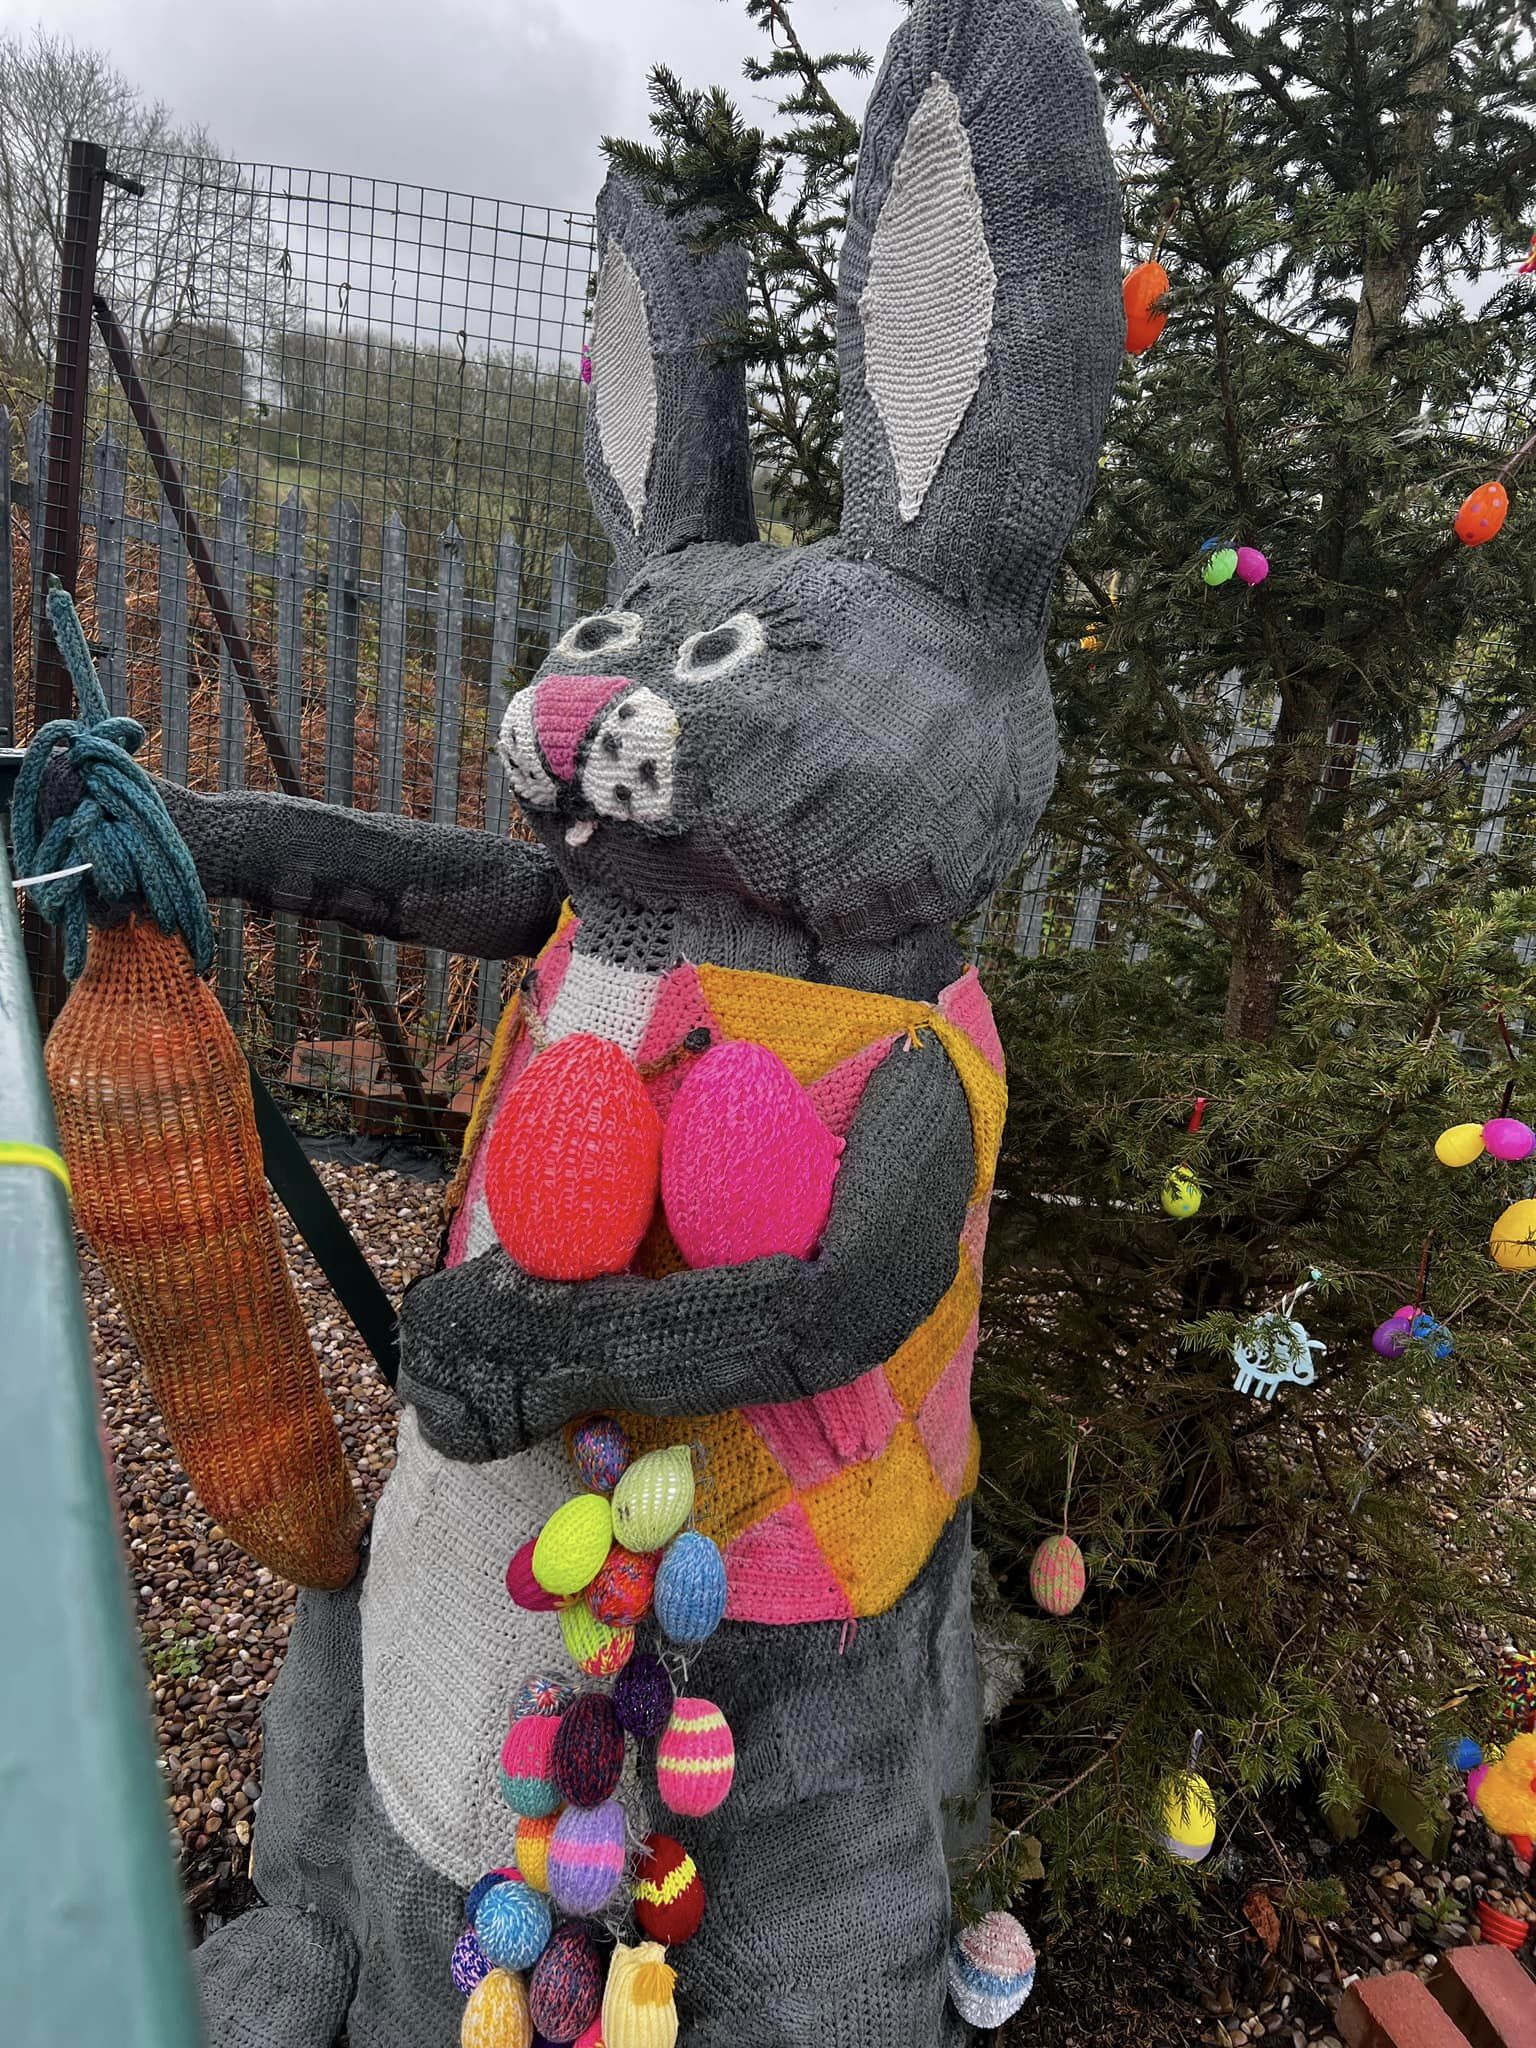 Giant knitted rabbit